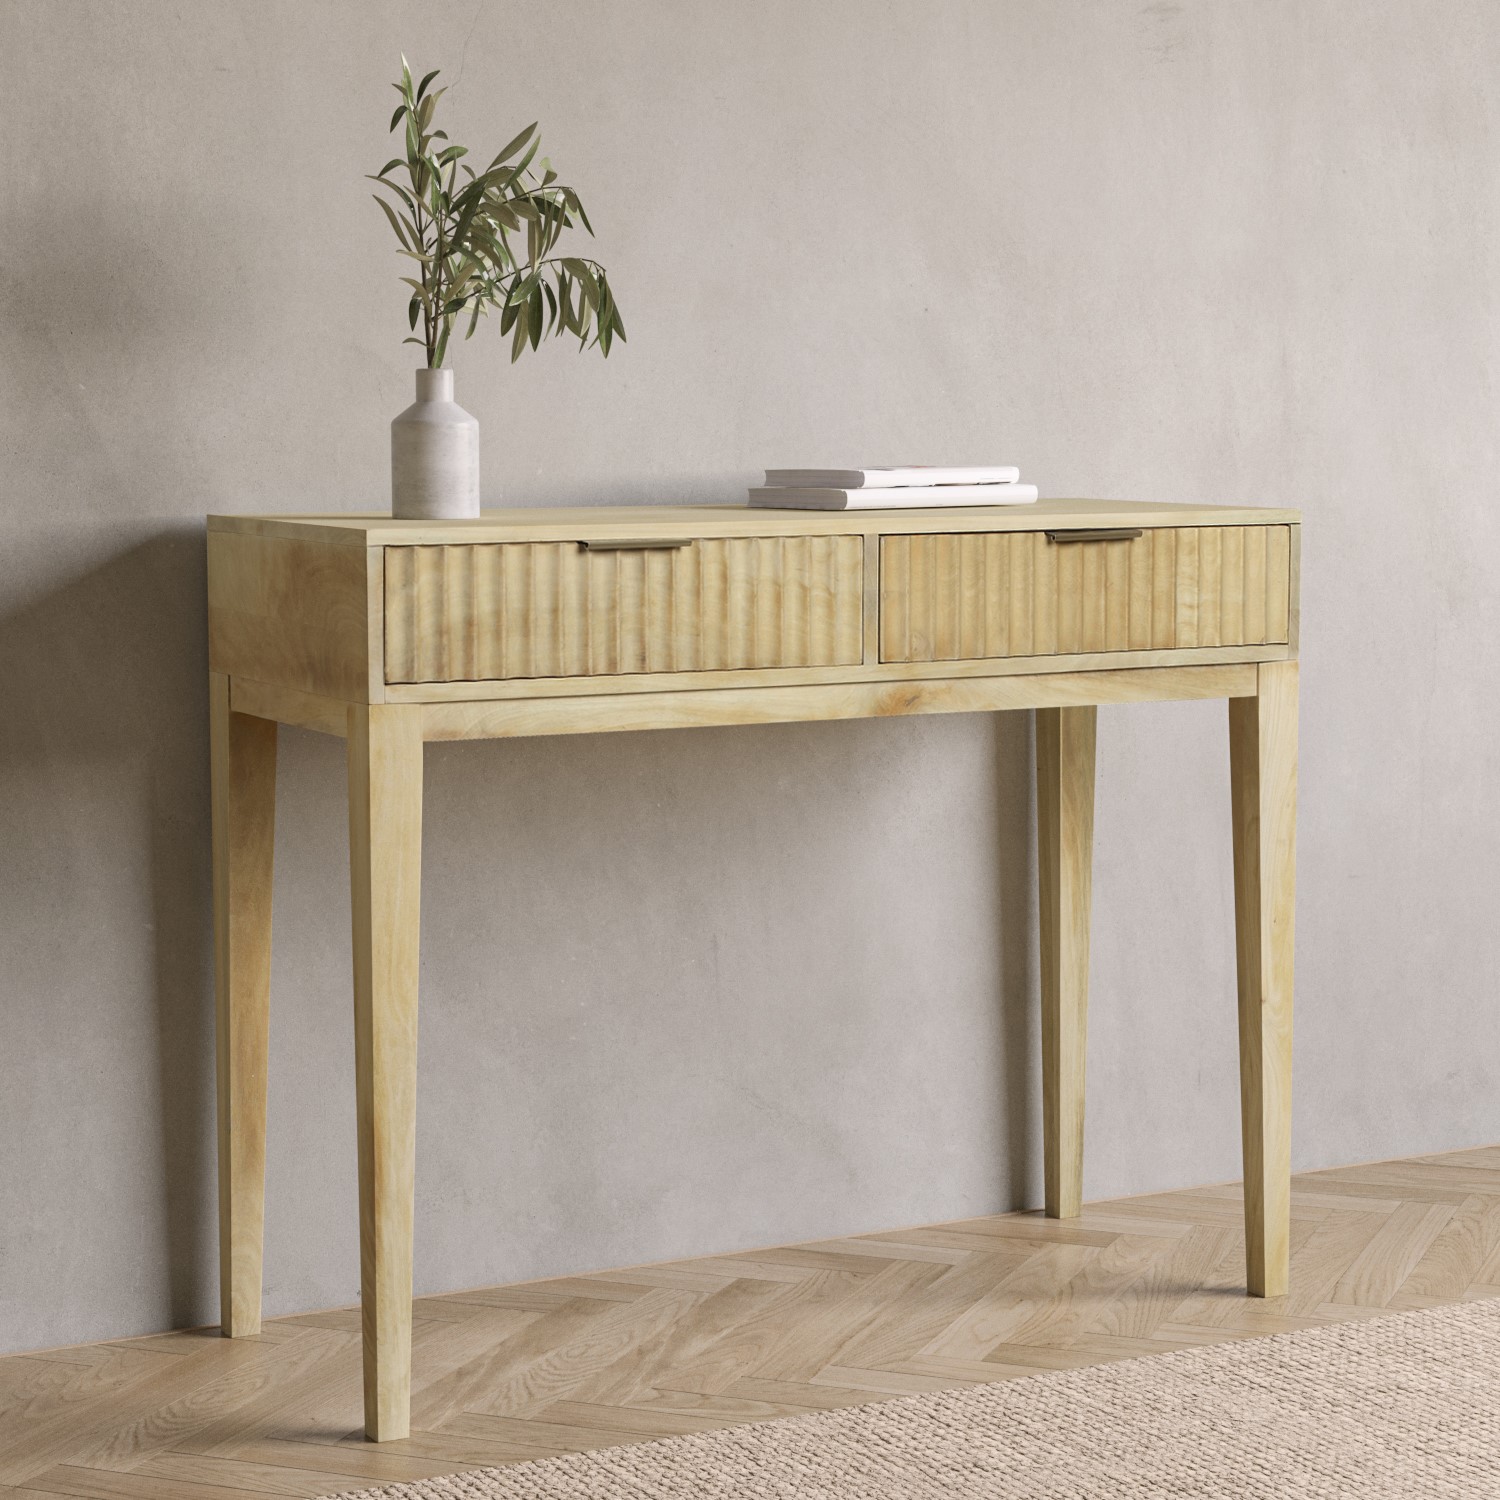 Read more about Small solid mango fluted wood console table with drawers linea